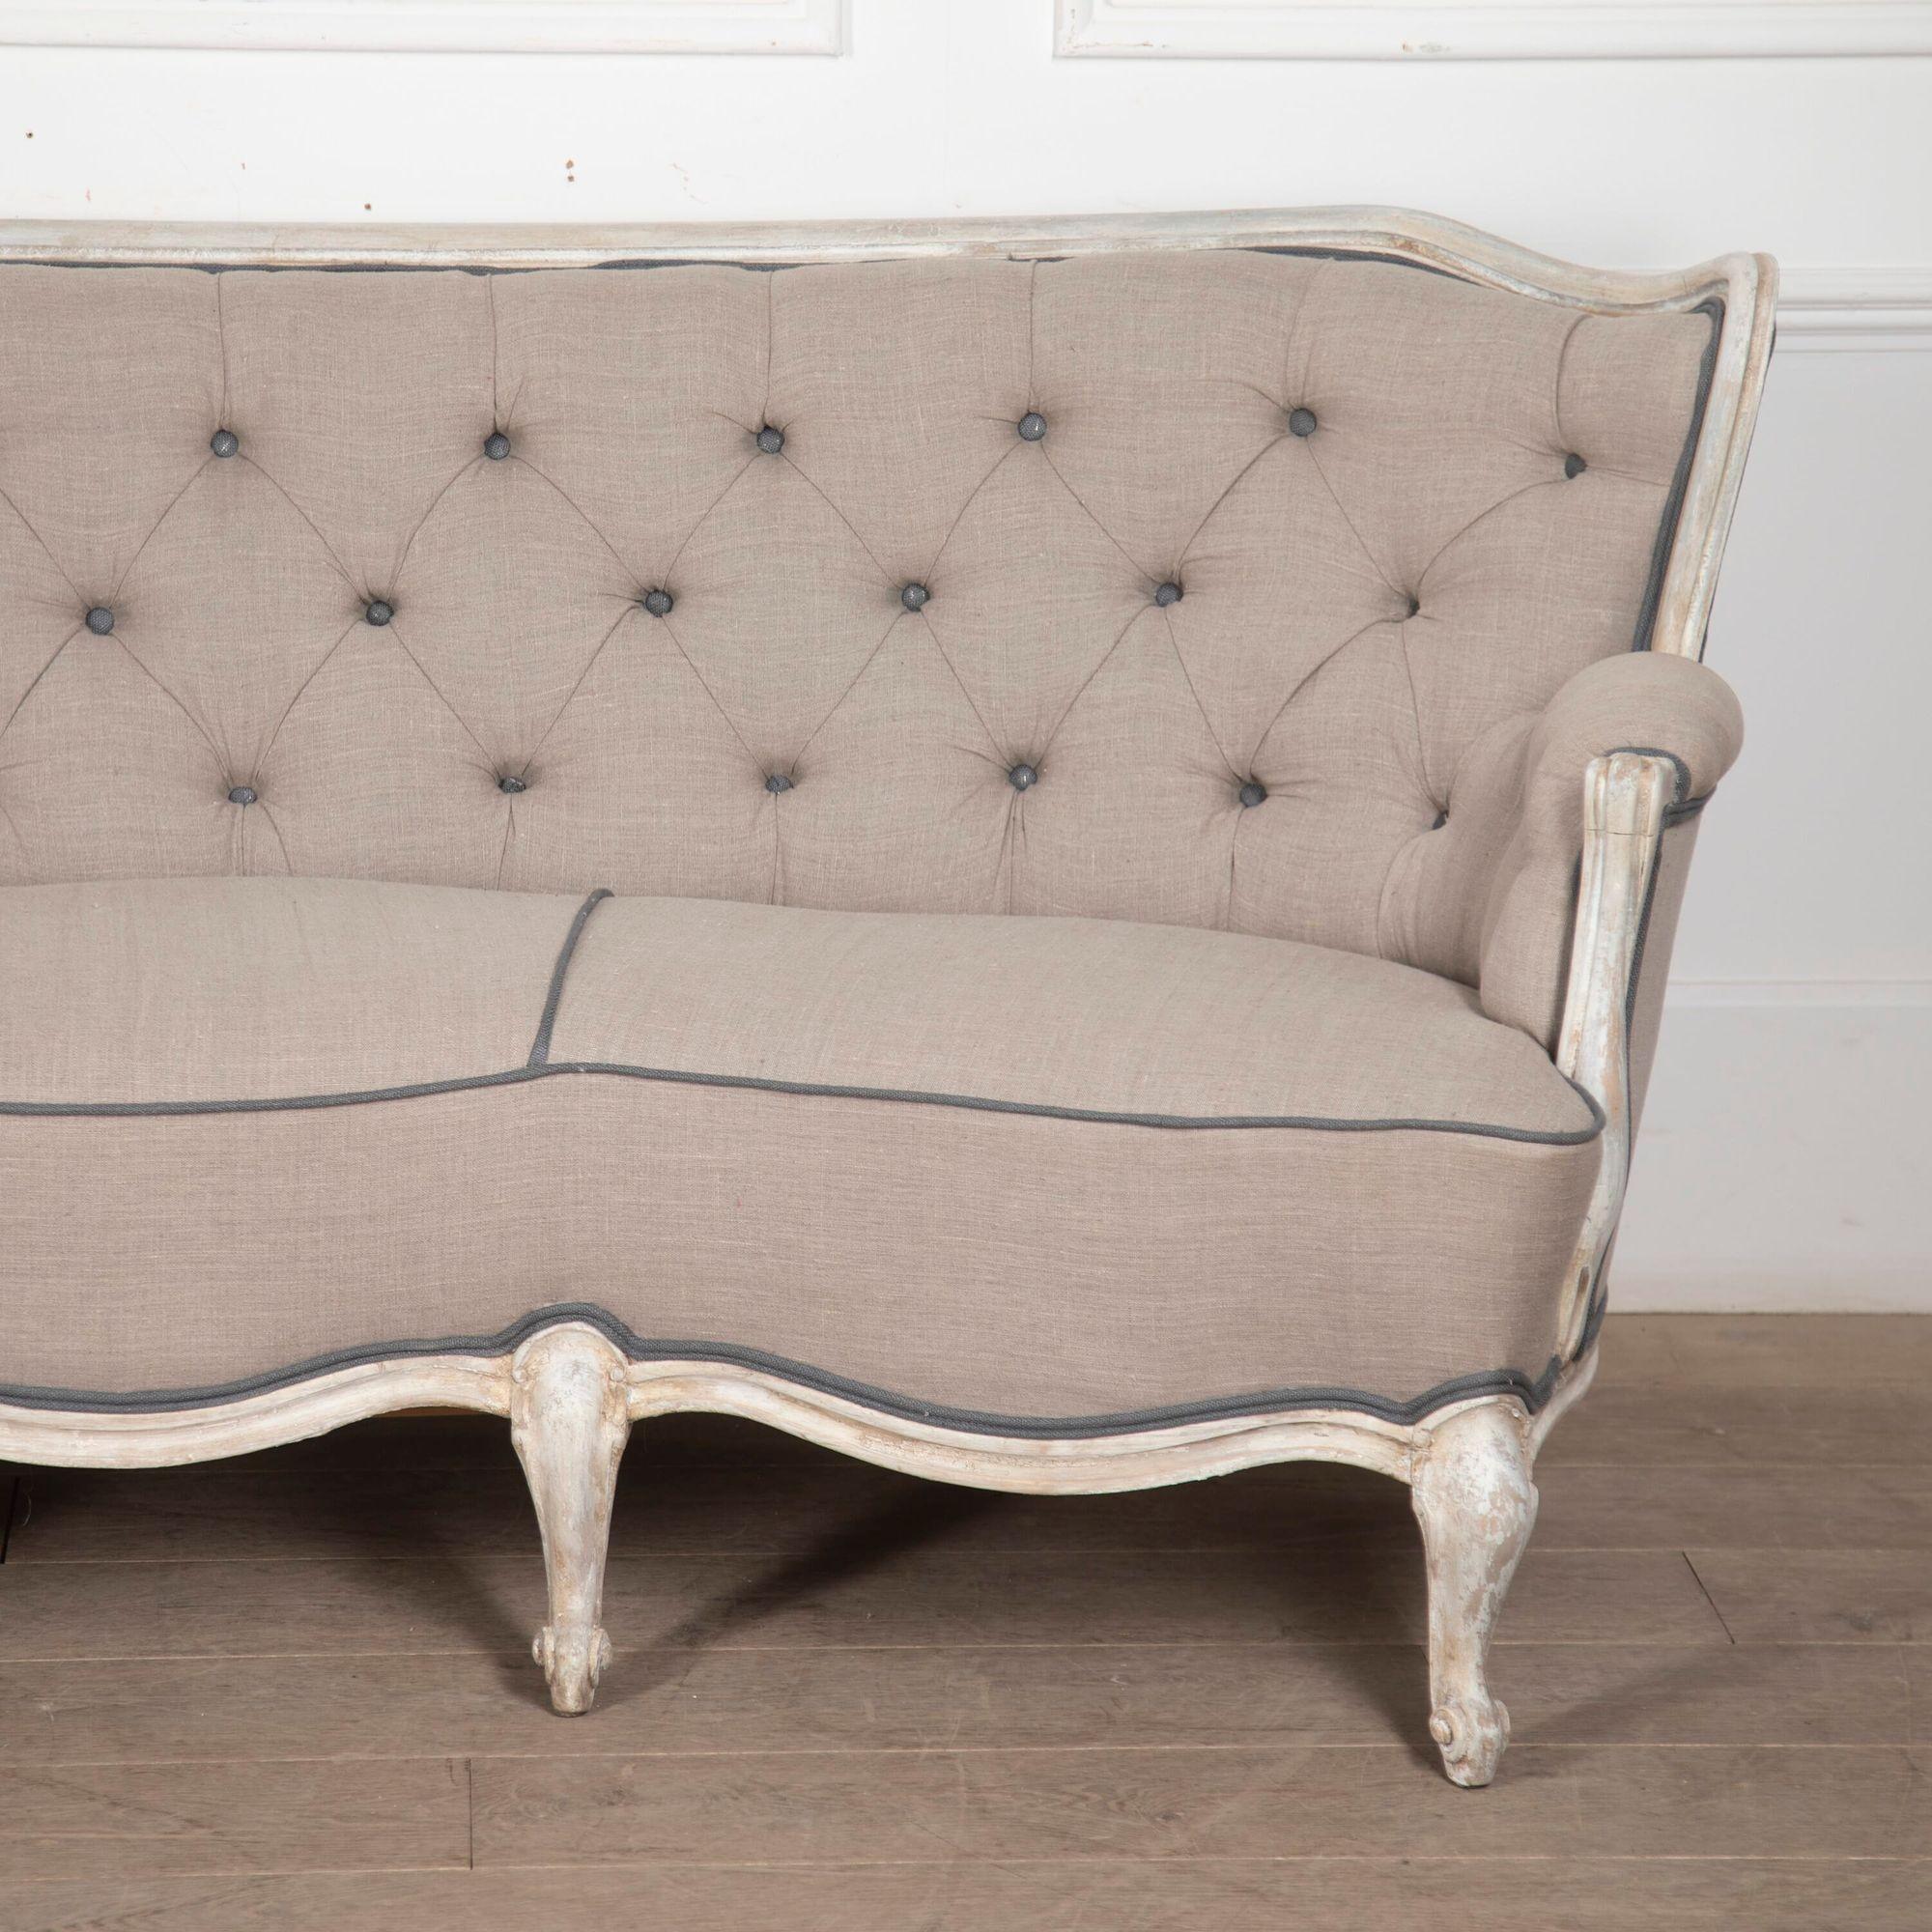 19th Century English Painted Settee For Sale 3